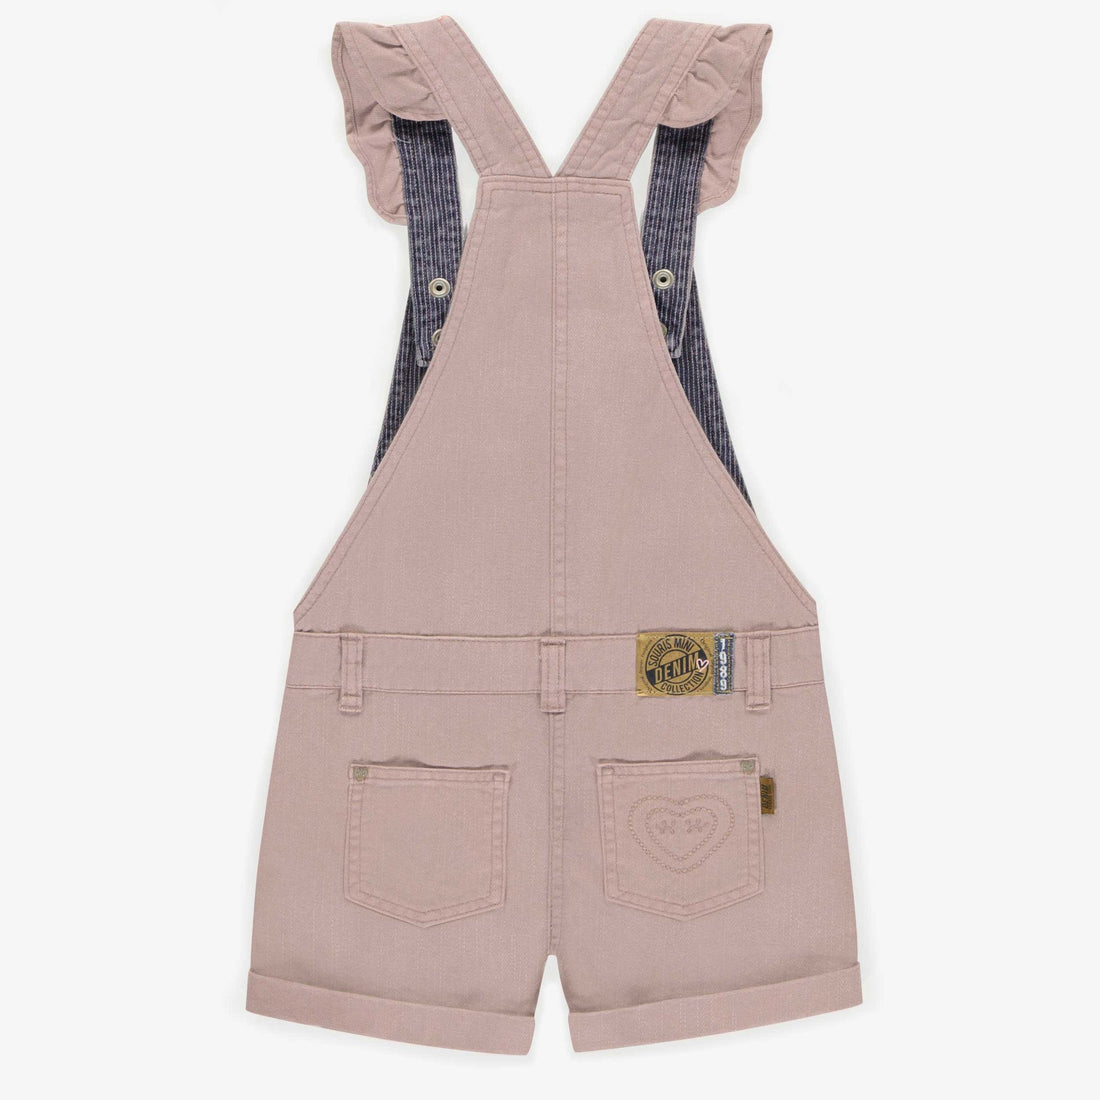 SHORT OVERALL IN PINK COLORED STRETCH DENIM, CHILD